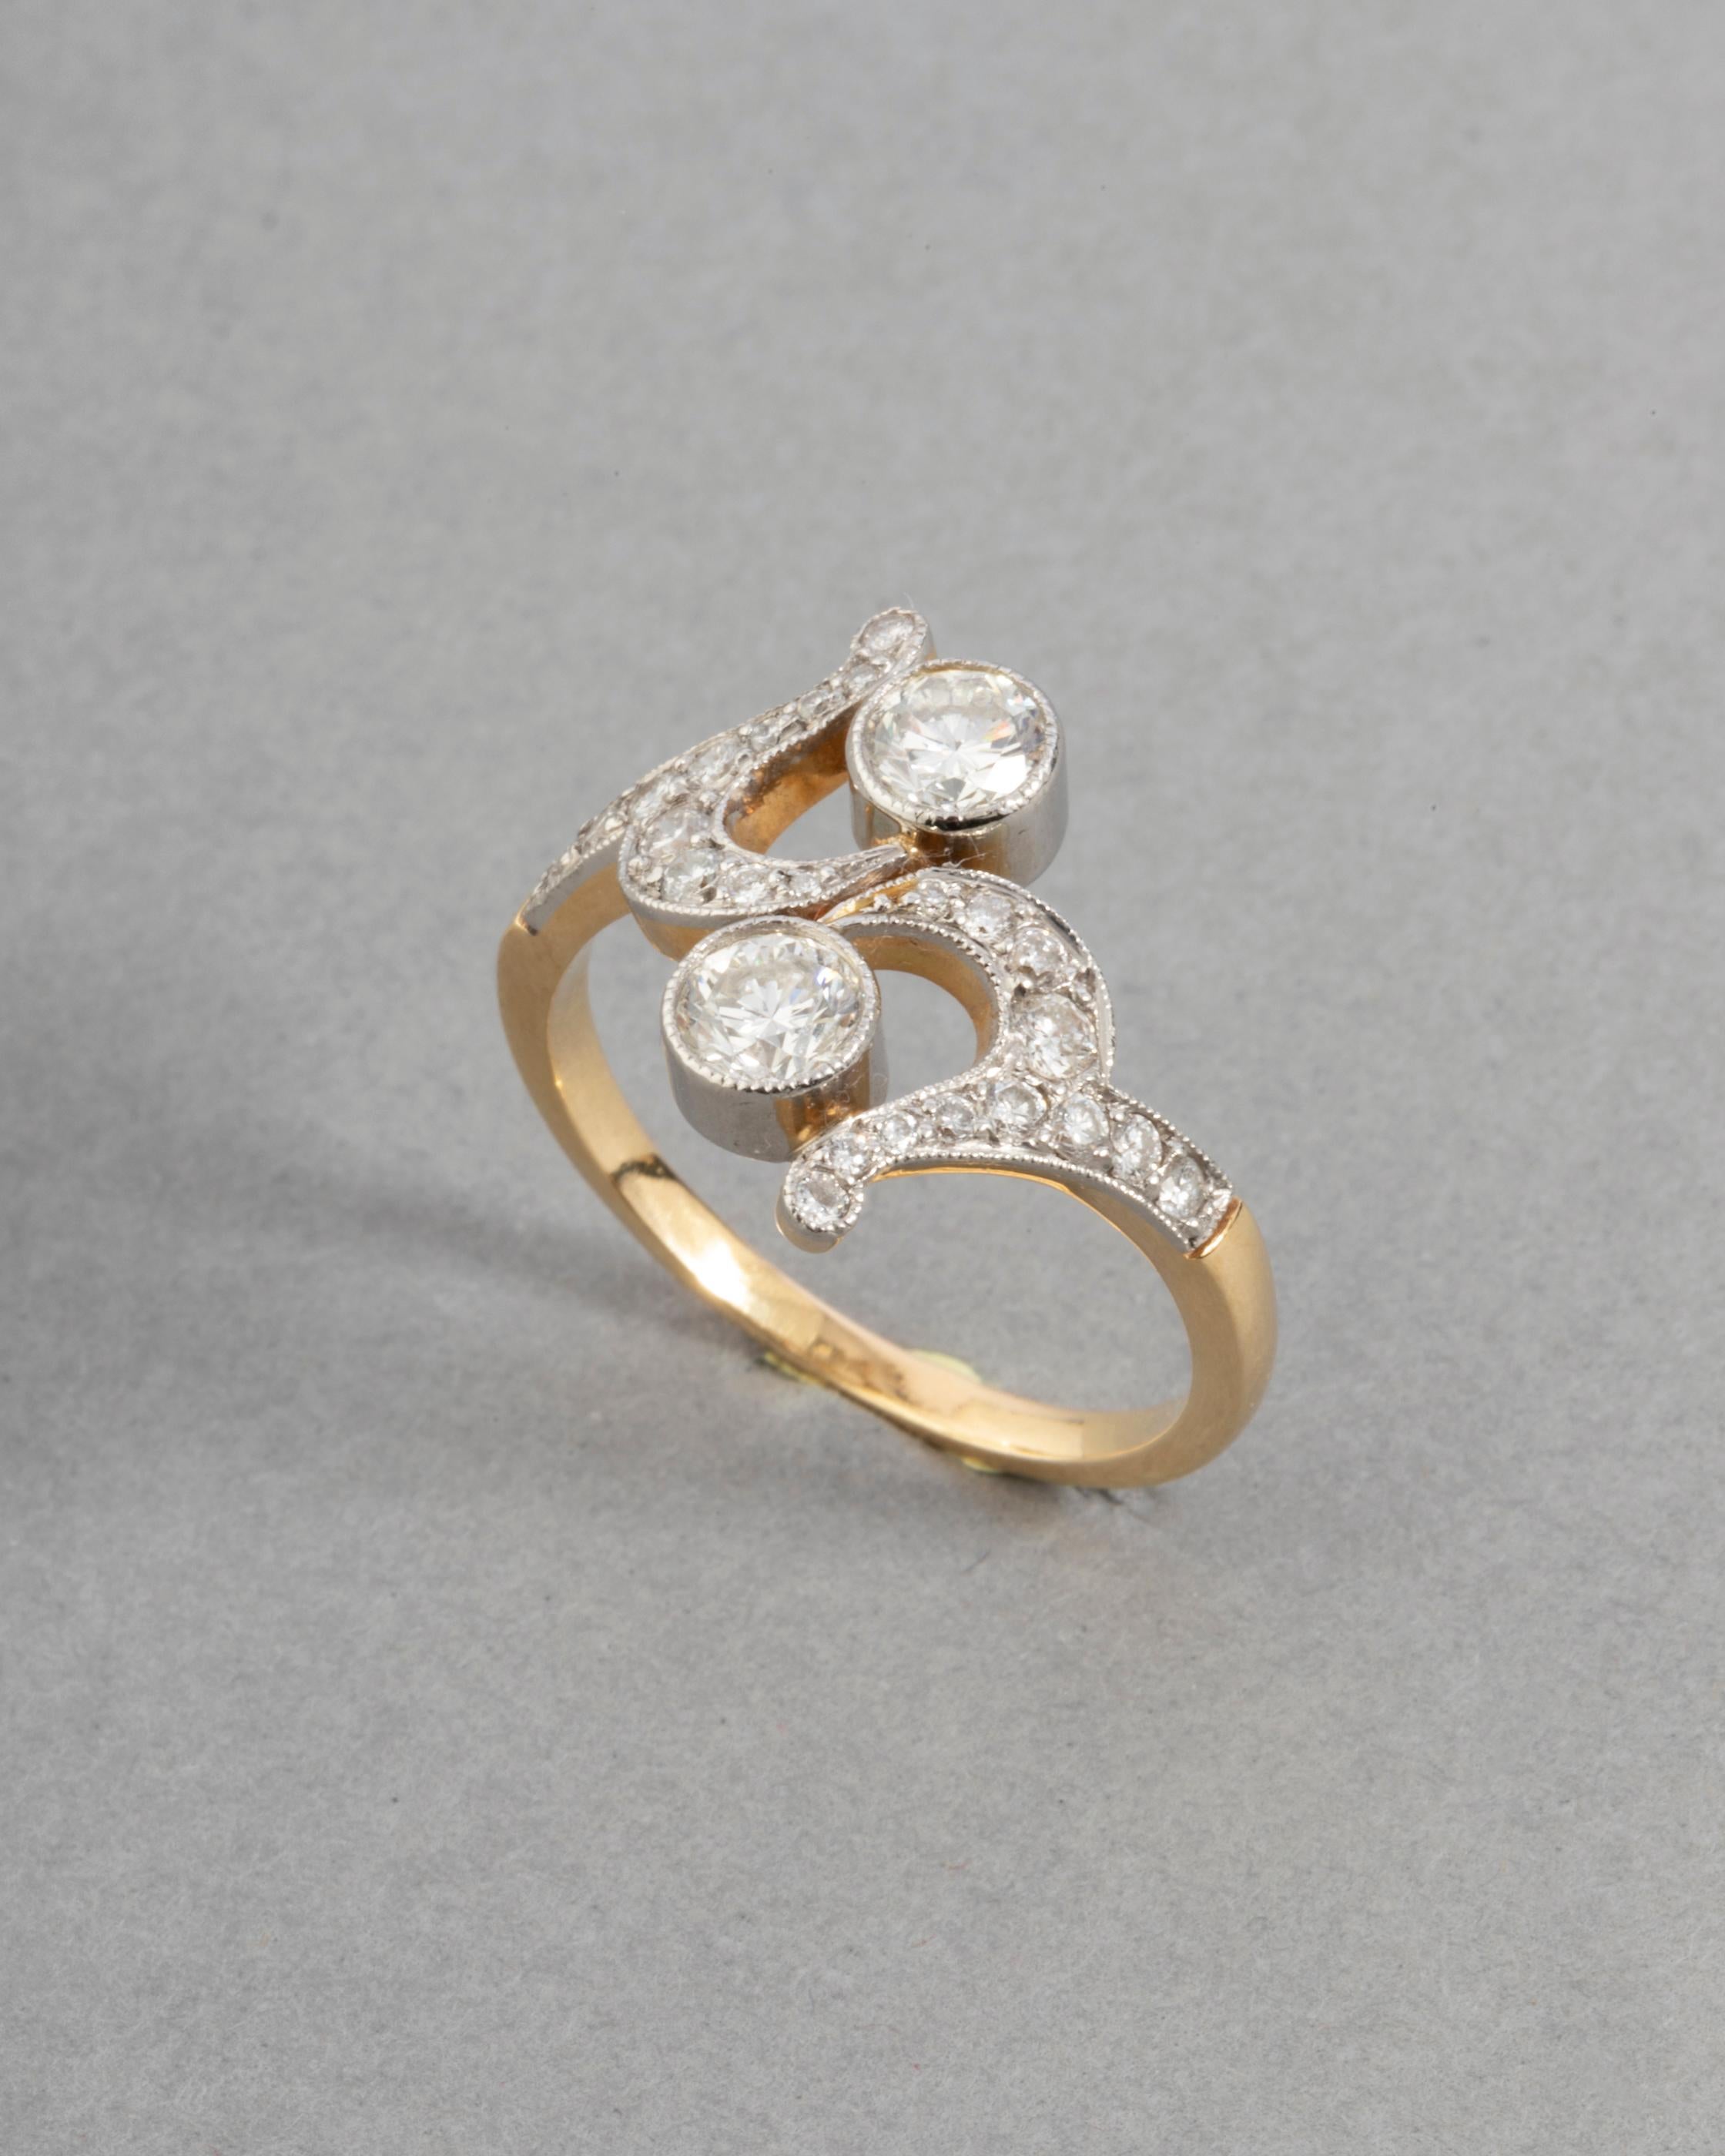 Gold Platinum and Diamonds French Antique Ring 1